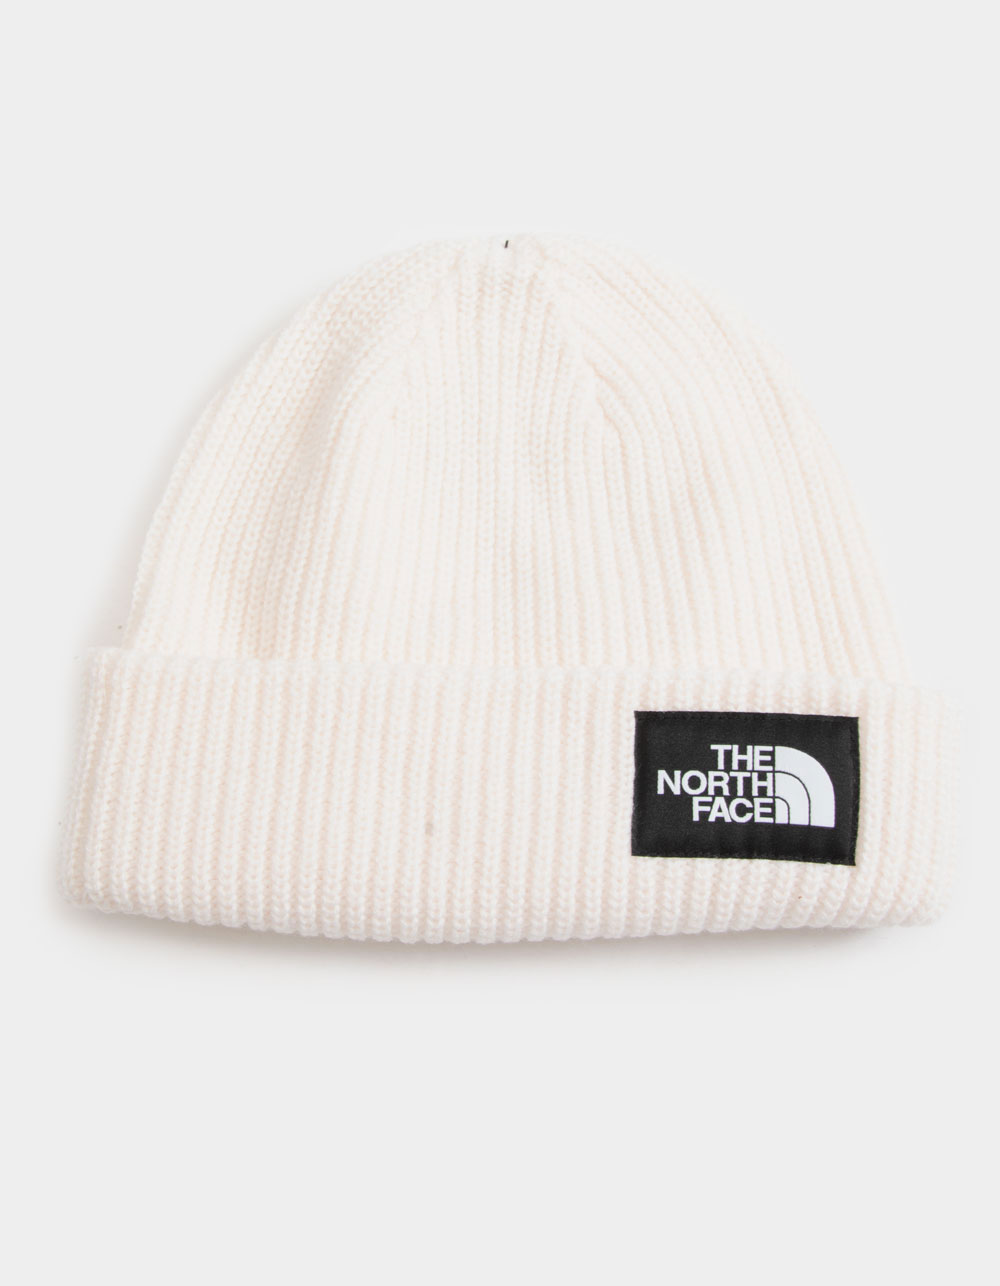 THE NORTH FACE Salty Dog Beanie - HEATHER GRAY | Tillys